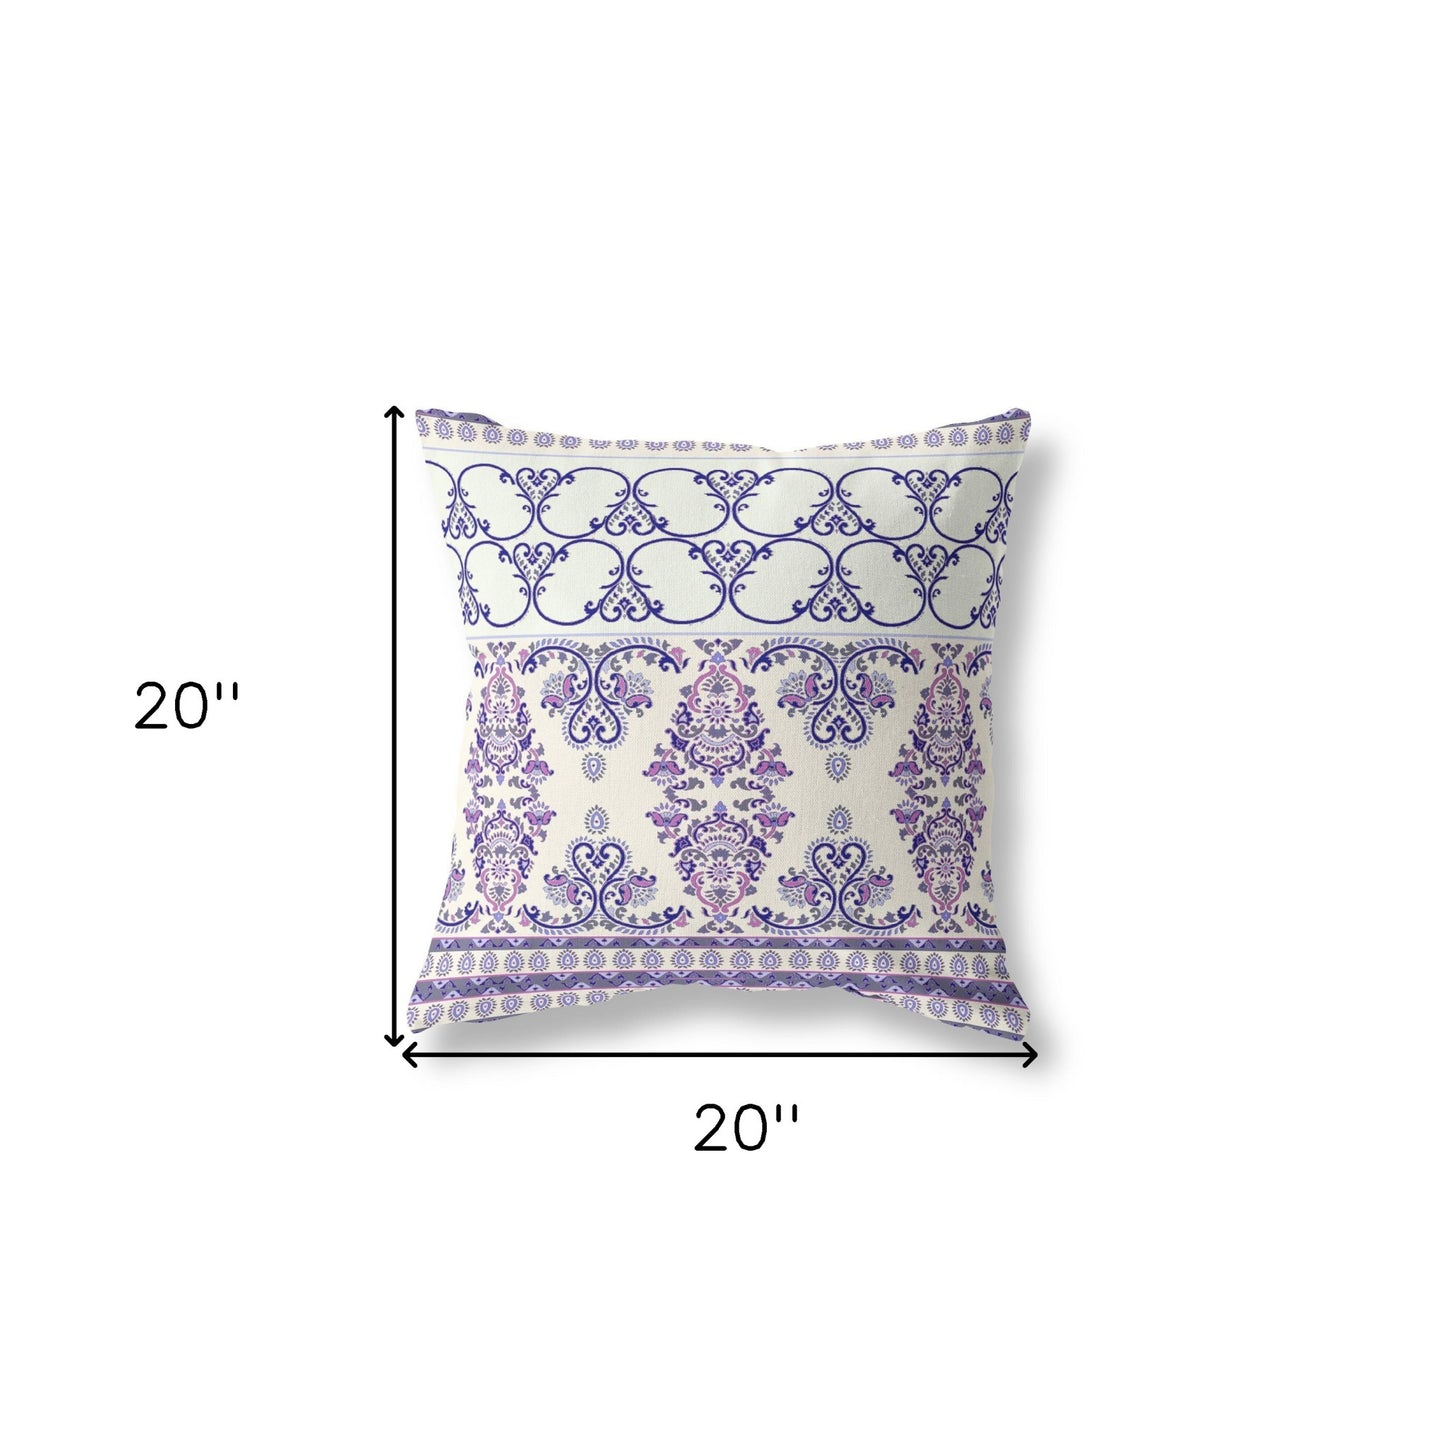 18" X 18" Off White And Navy Zippered Damask Indoor Outdoor Throw Pillow